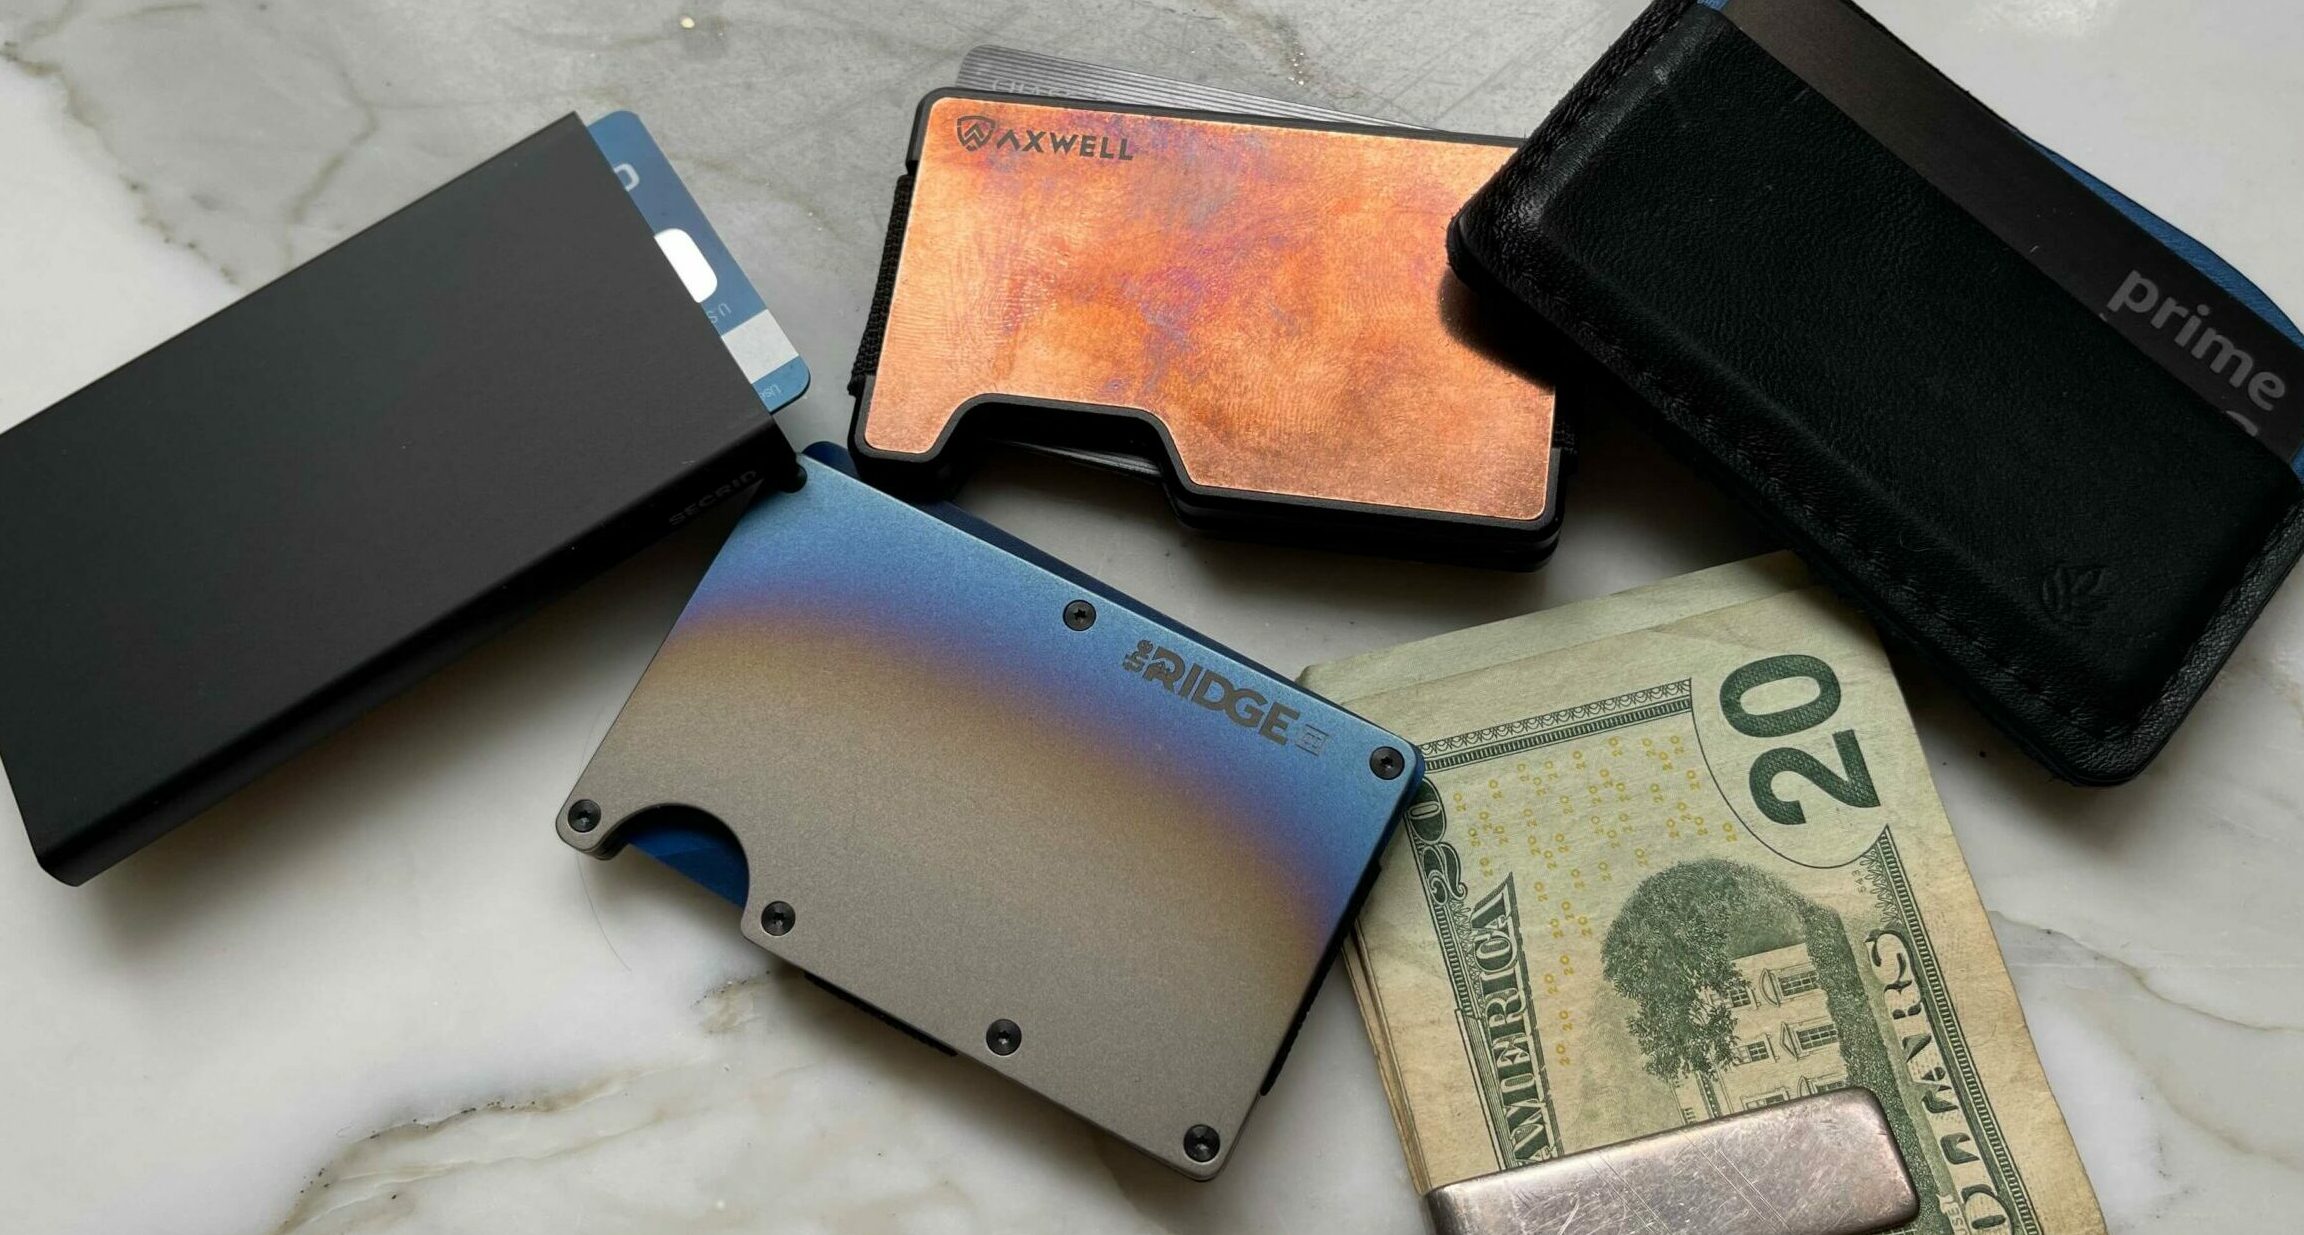 Article: Best Minimalist Wallets Image: slim wallets and money clip